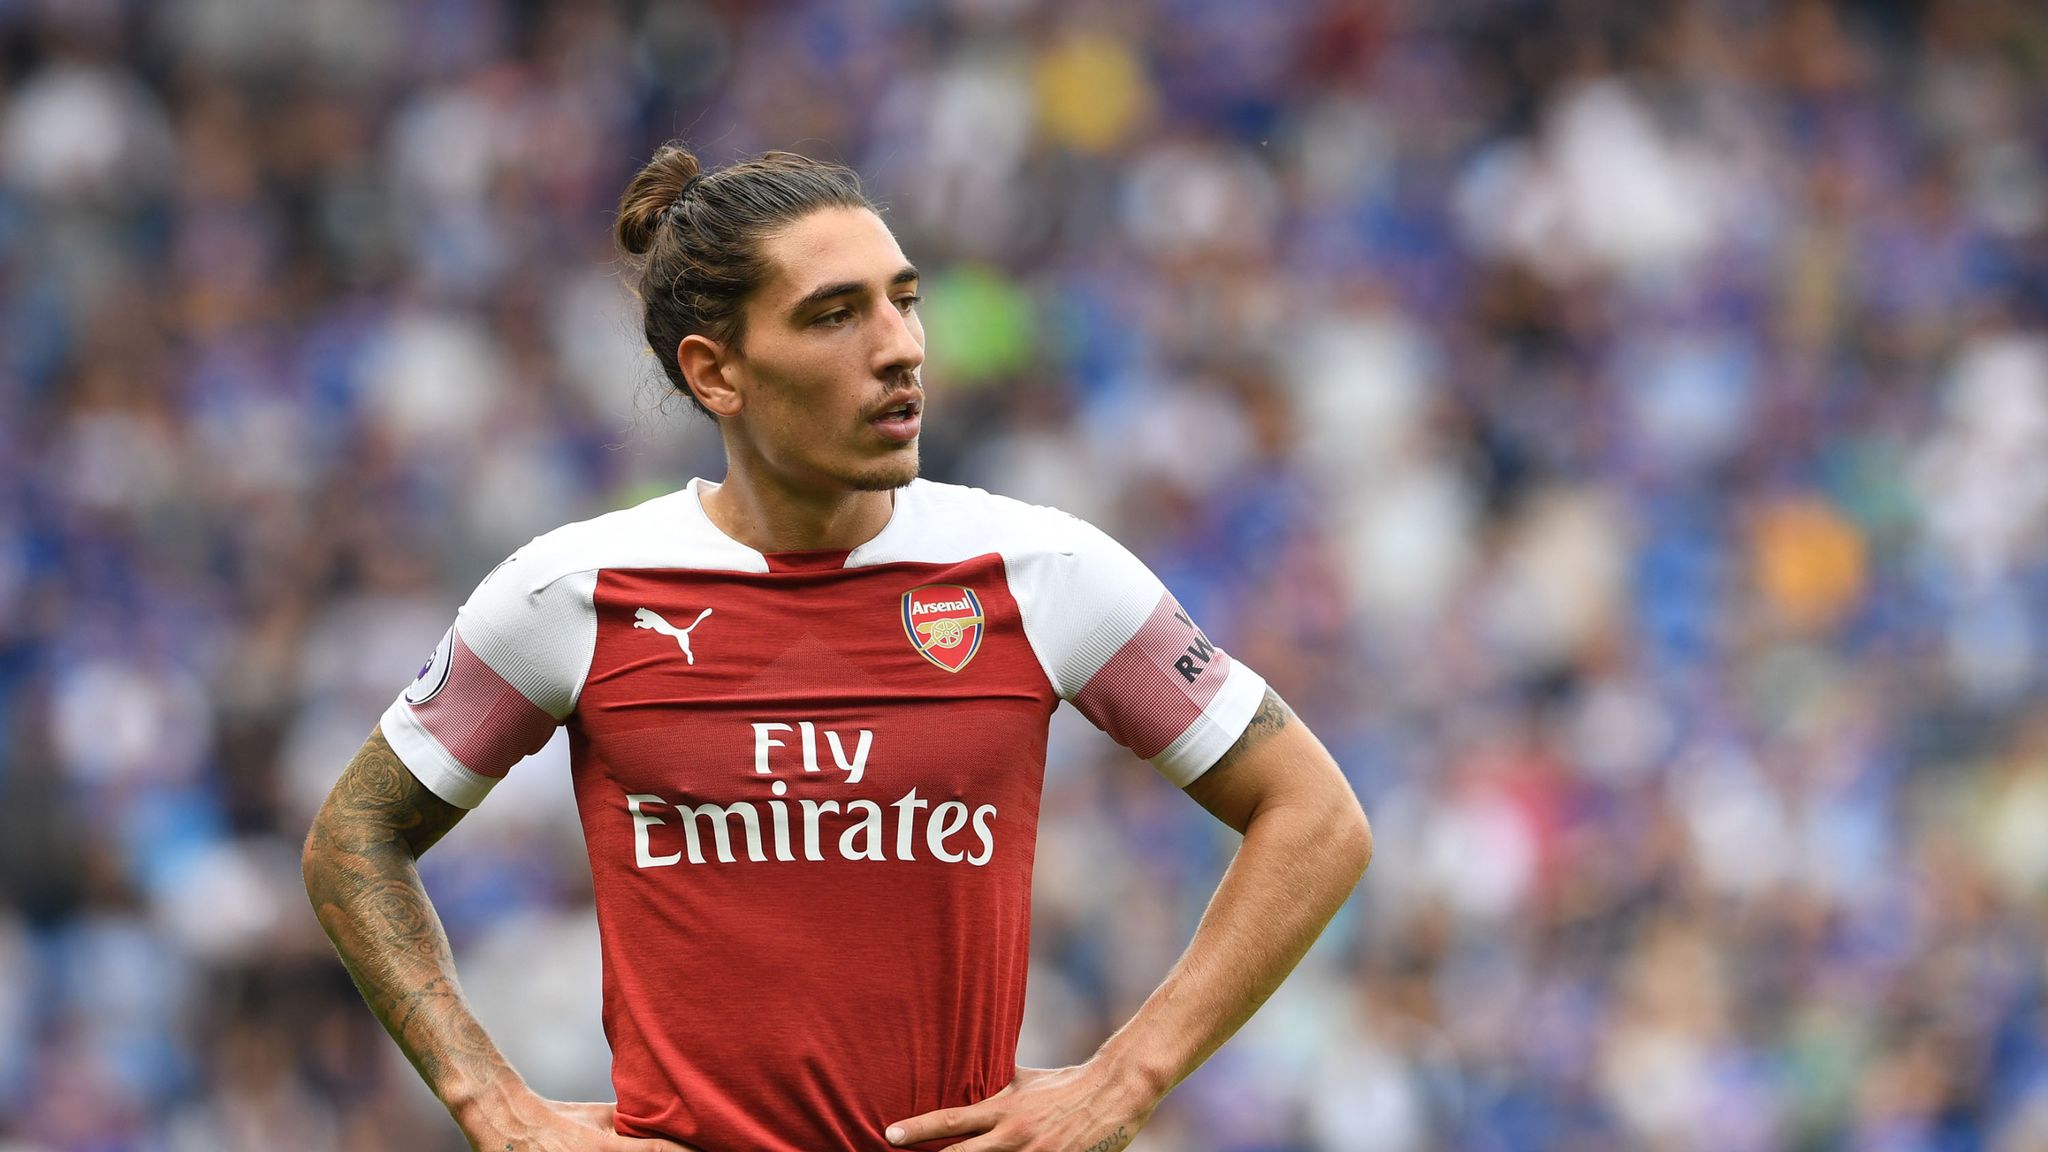 Bellerin : Wdlloqonvrfkvm / First name héctor last name bellerín moruno nationality spain date of birth 19 march 1995 age 26 country of birth spain place of birth barcelona position